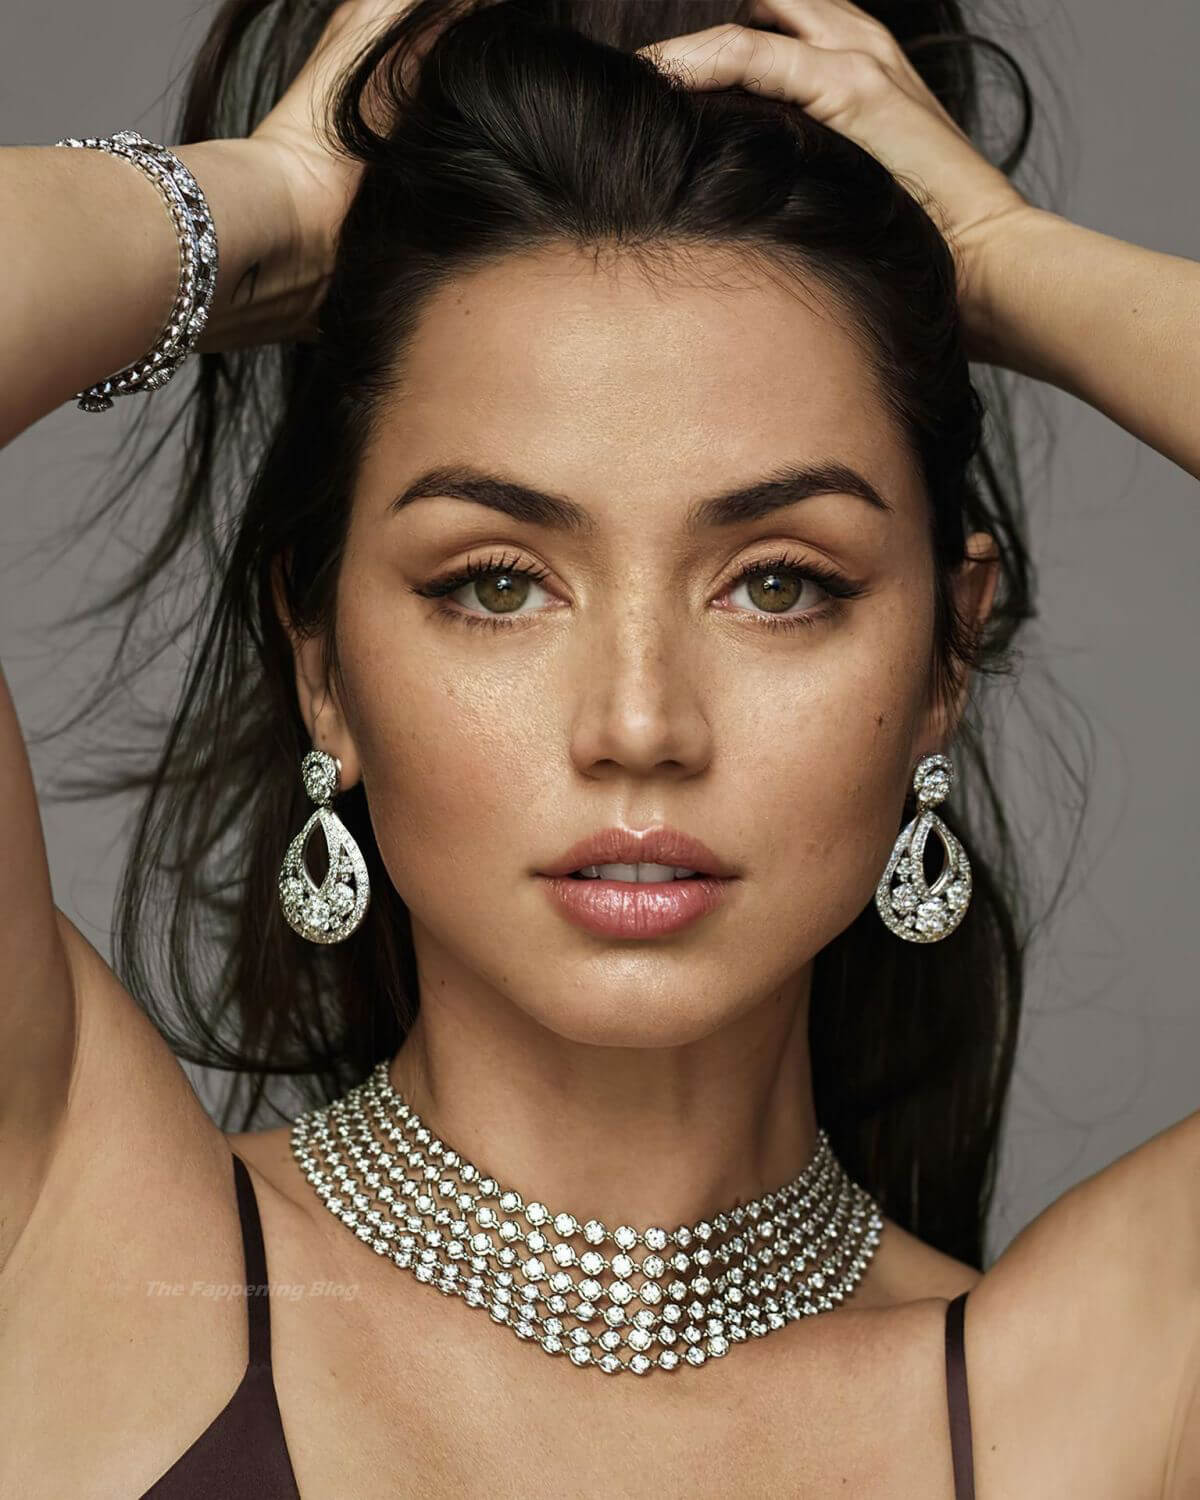 Ana de Armas on the Cover Photoshoot of The Sunday Times Style Magazine, January 2021 1